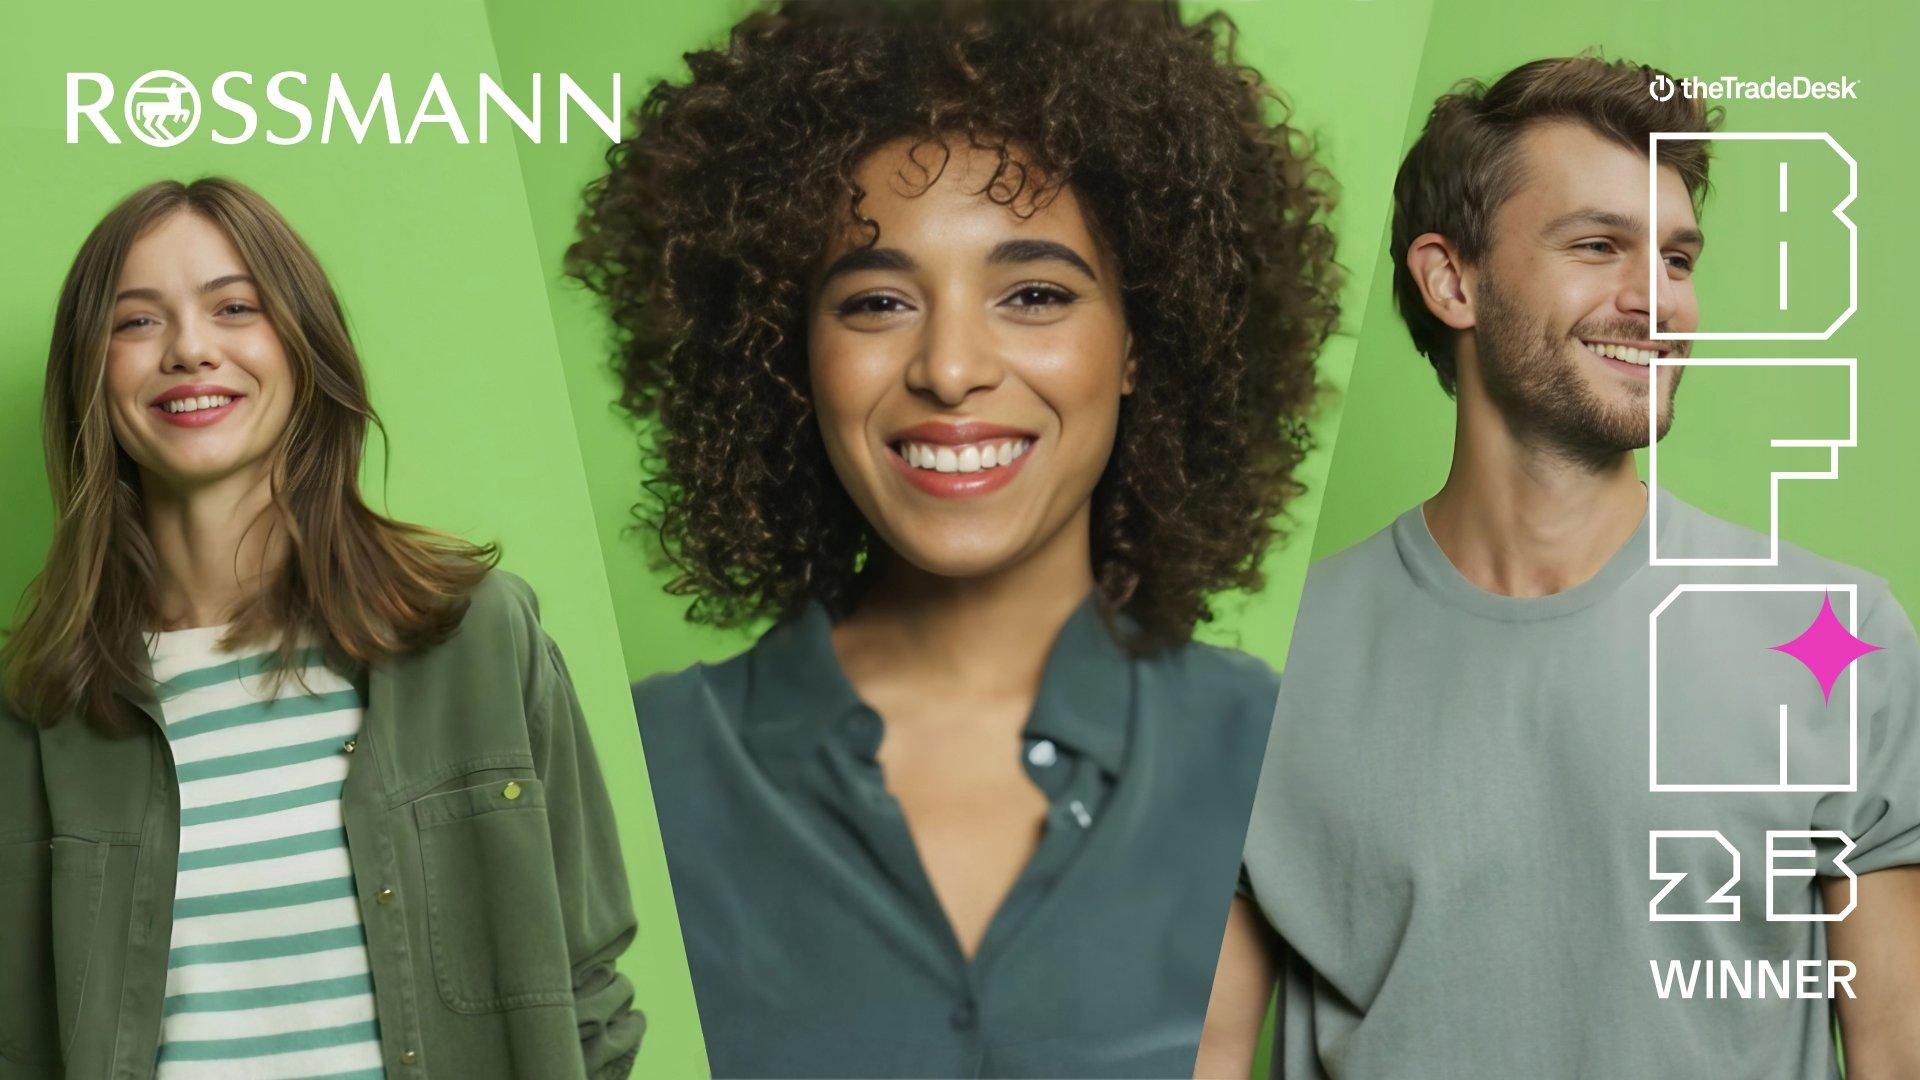 Rossmann BFA '23 Winner | Case Study | The Trade Desk - green image with a headshot of 3 people smiling